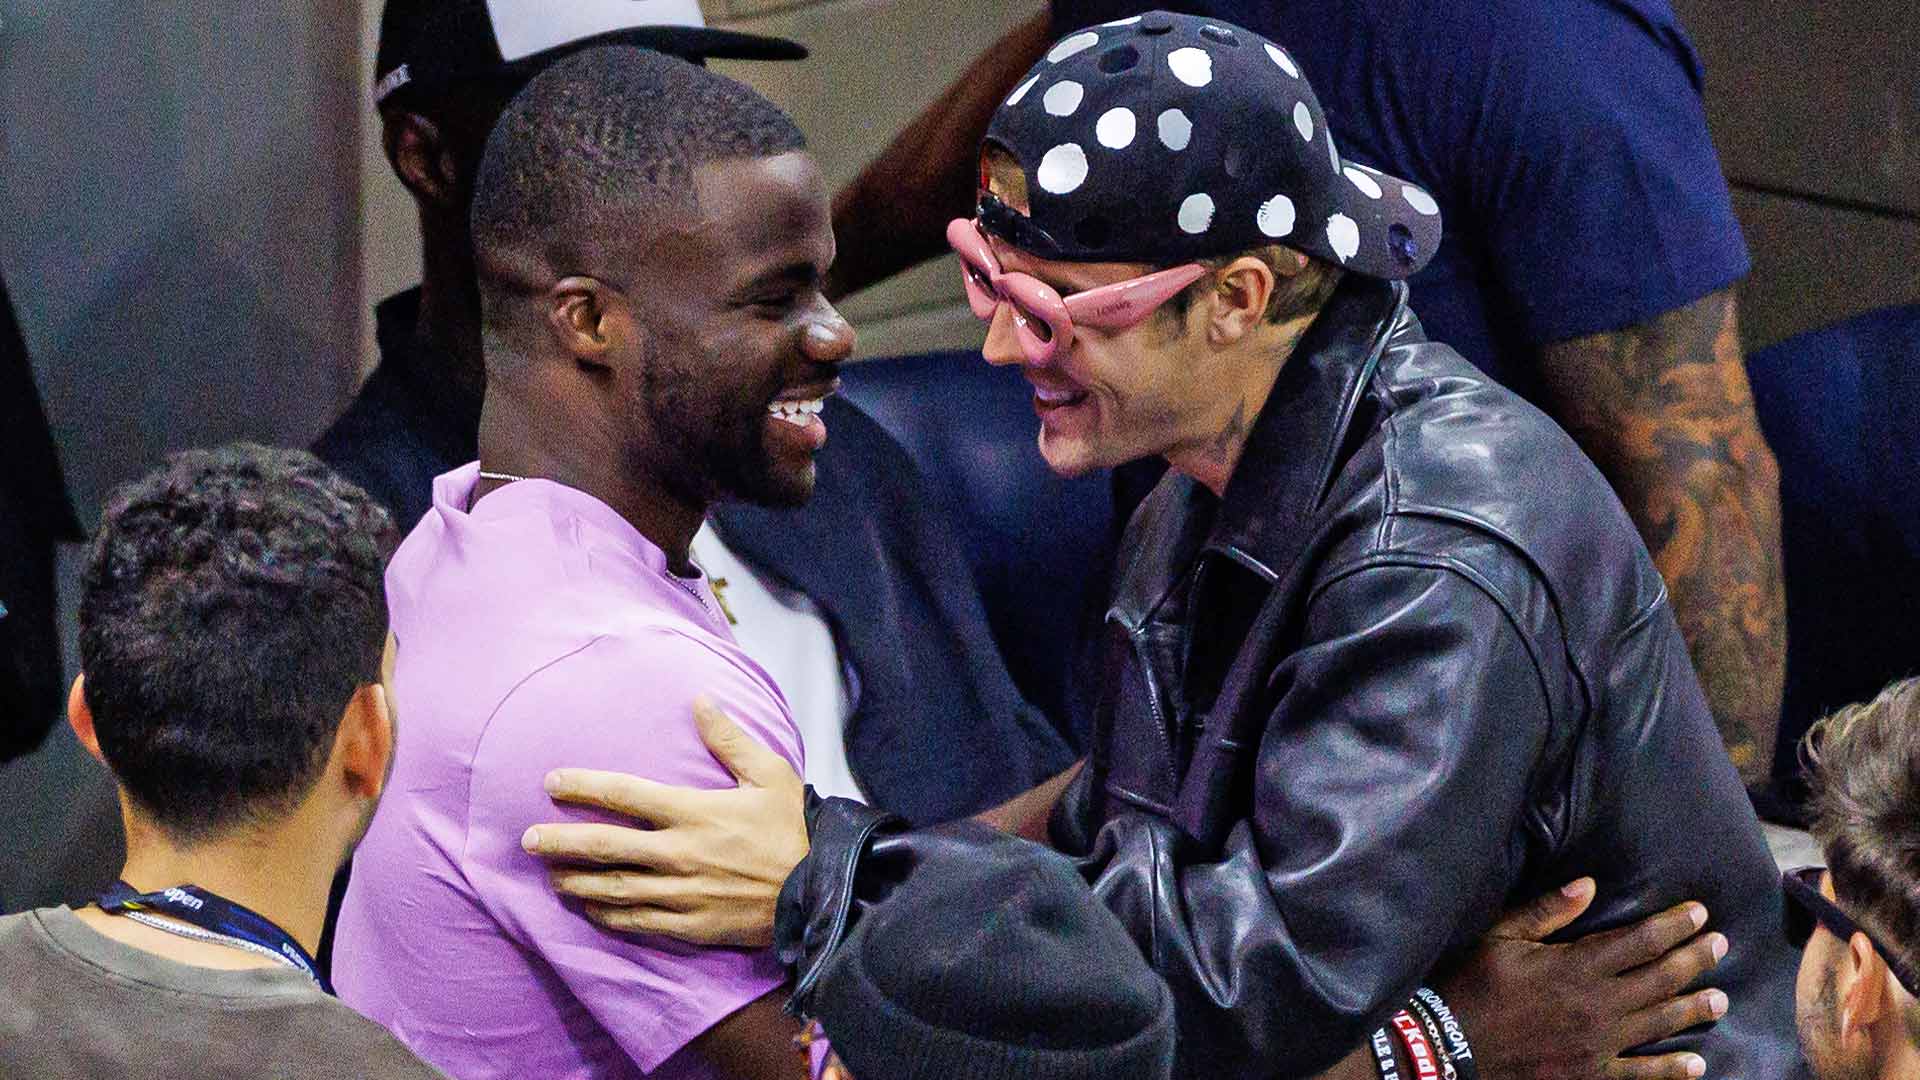 Frances Tiafoe meets Justin Bieber on Friday evening at the US Open.